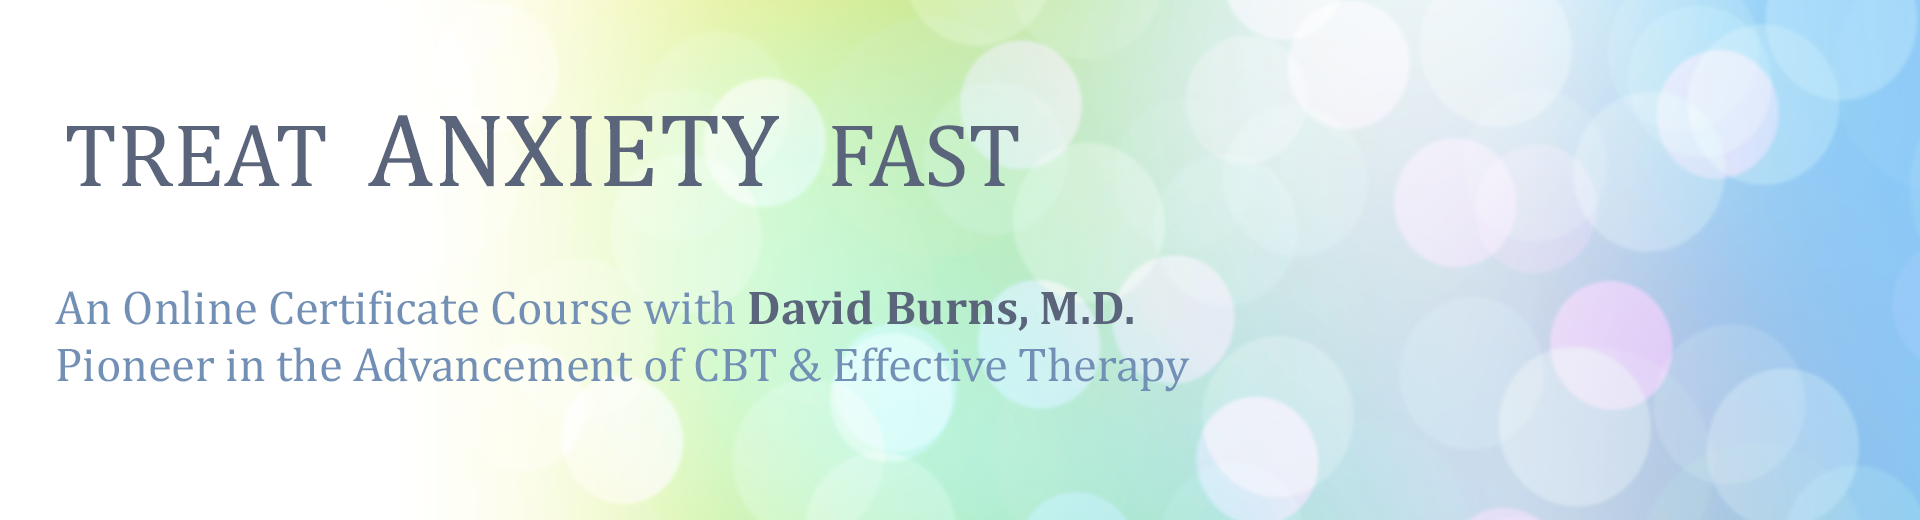 Treat Anxiety Fast: Certificate Course with Dr. David Burns